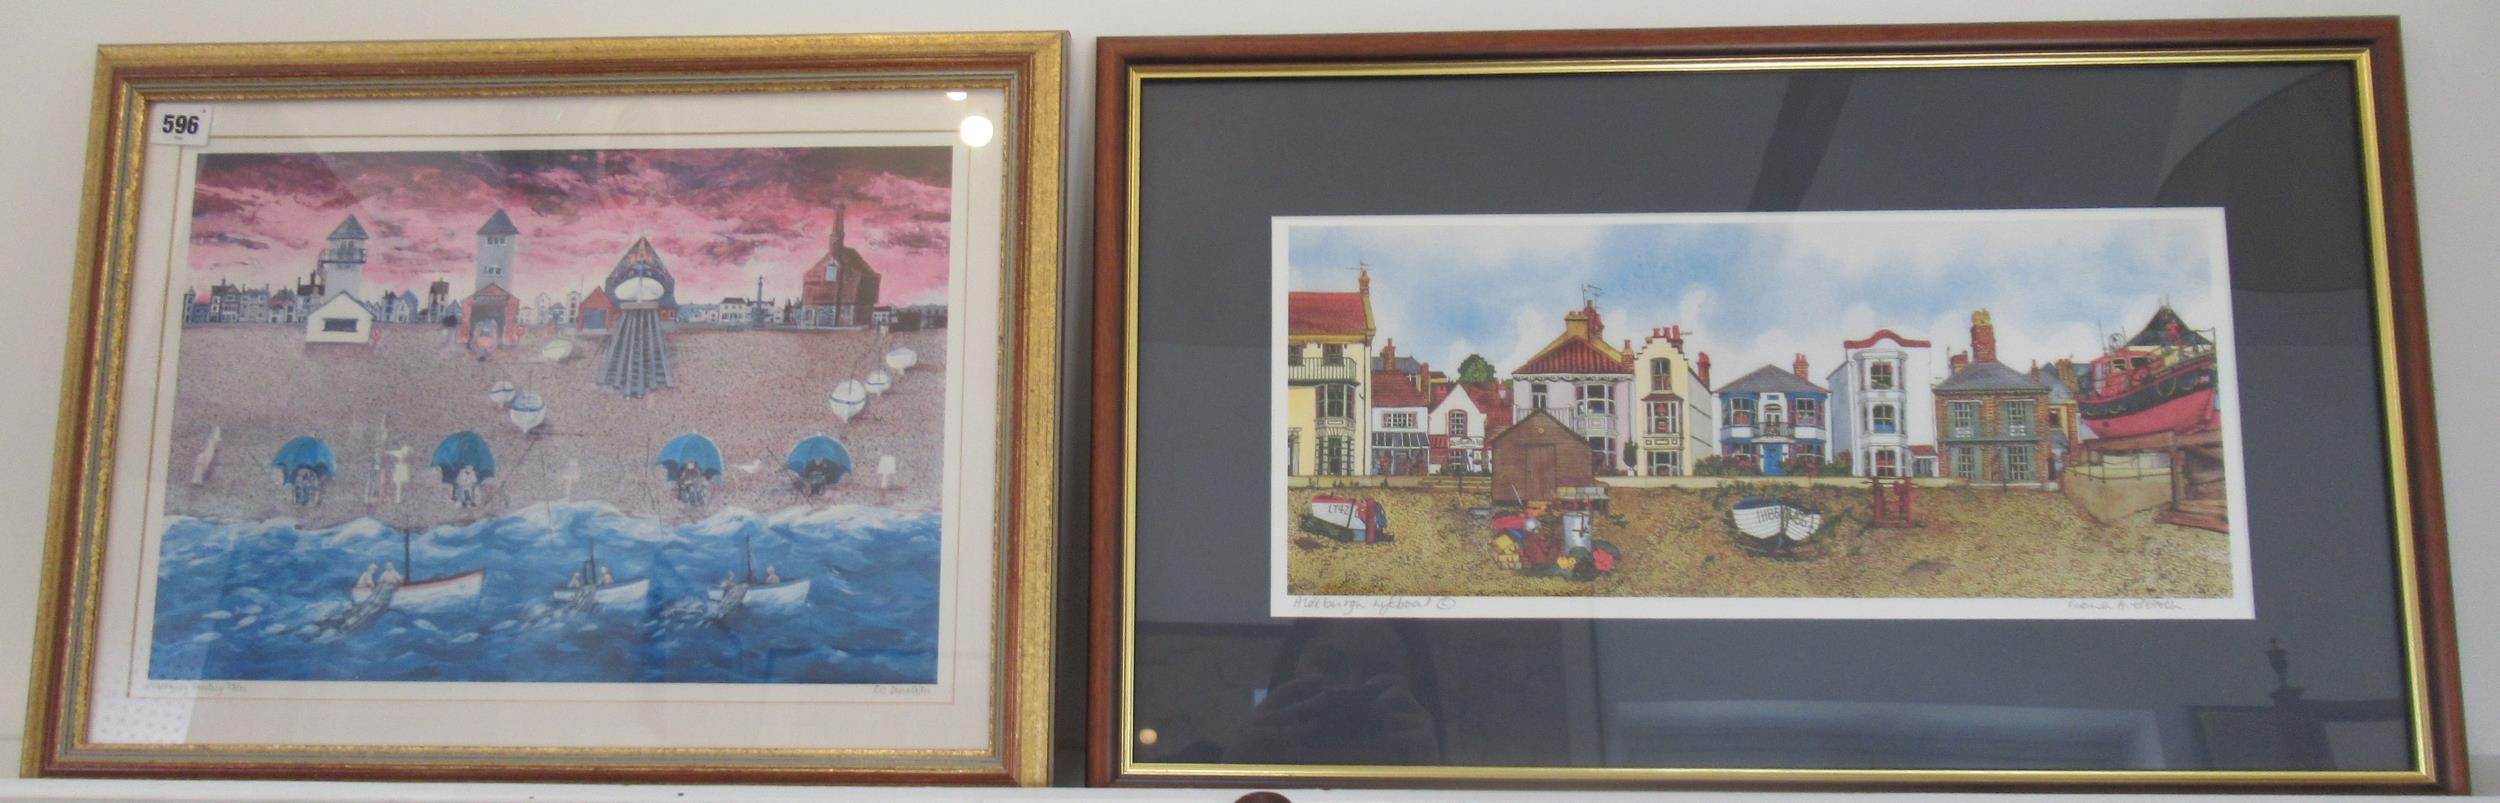 Two prints of Aldeburgh in Fantasy 84/500 by Ros Donaldson, 53cm x 40cm and Lifeboat Station